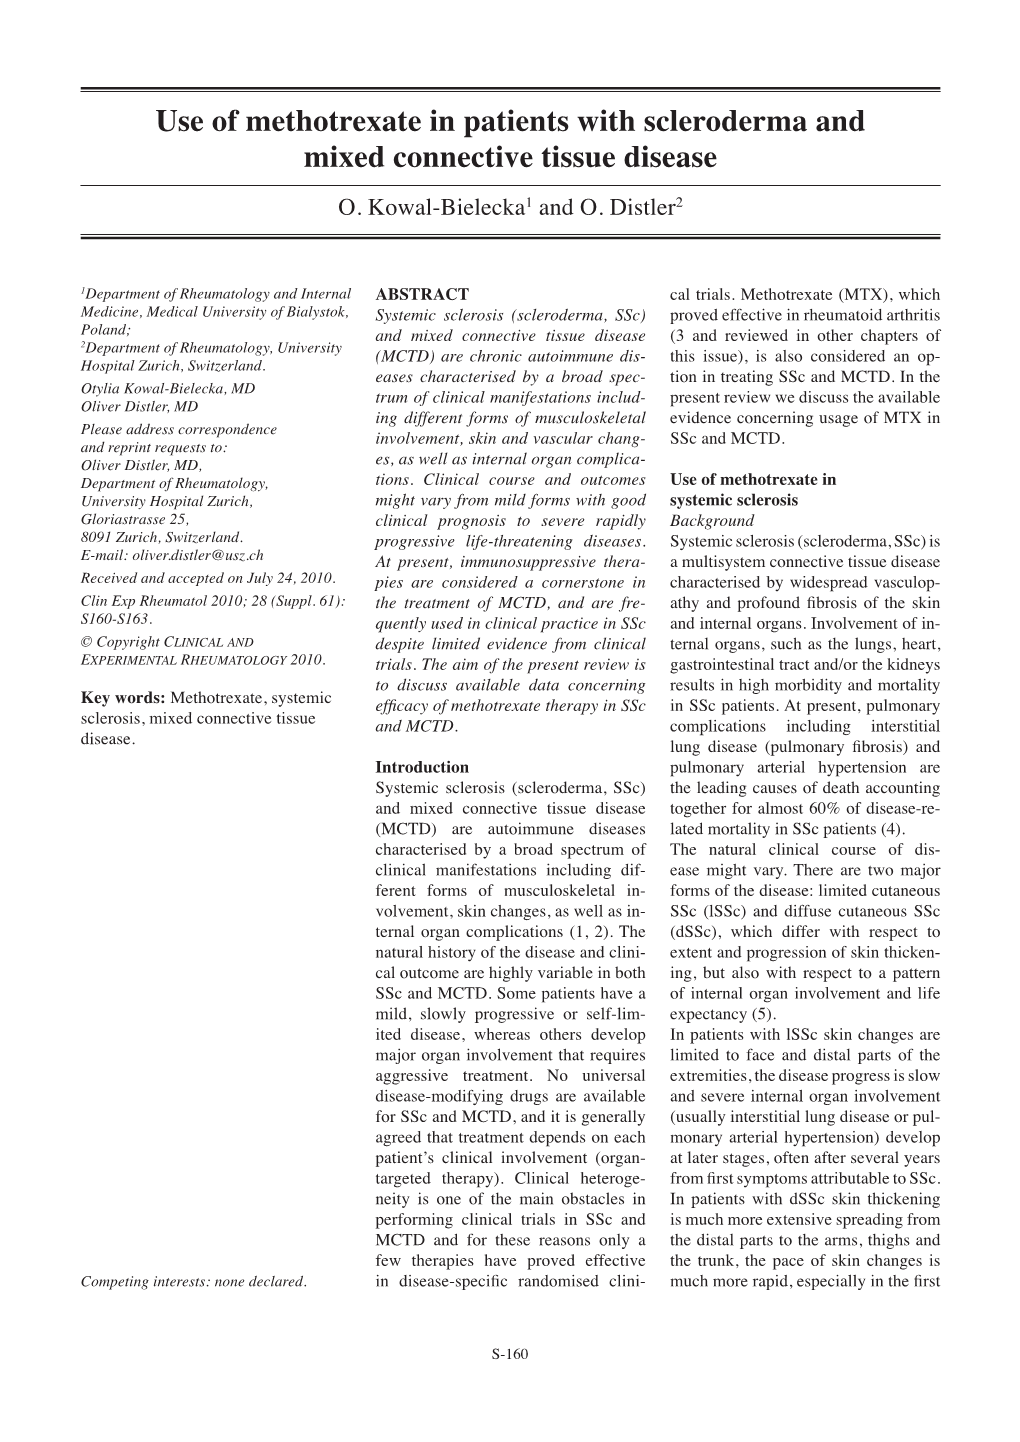 Use of Methotrexate in Patients with Scleroderma and Mixed Connective Tissue Disease O